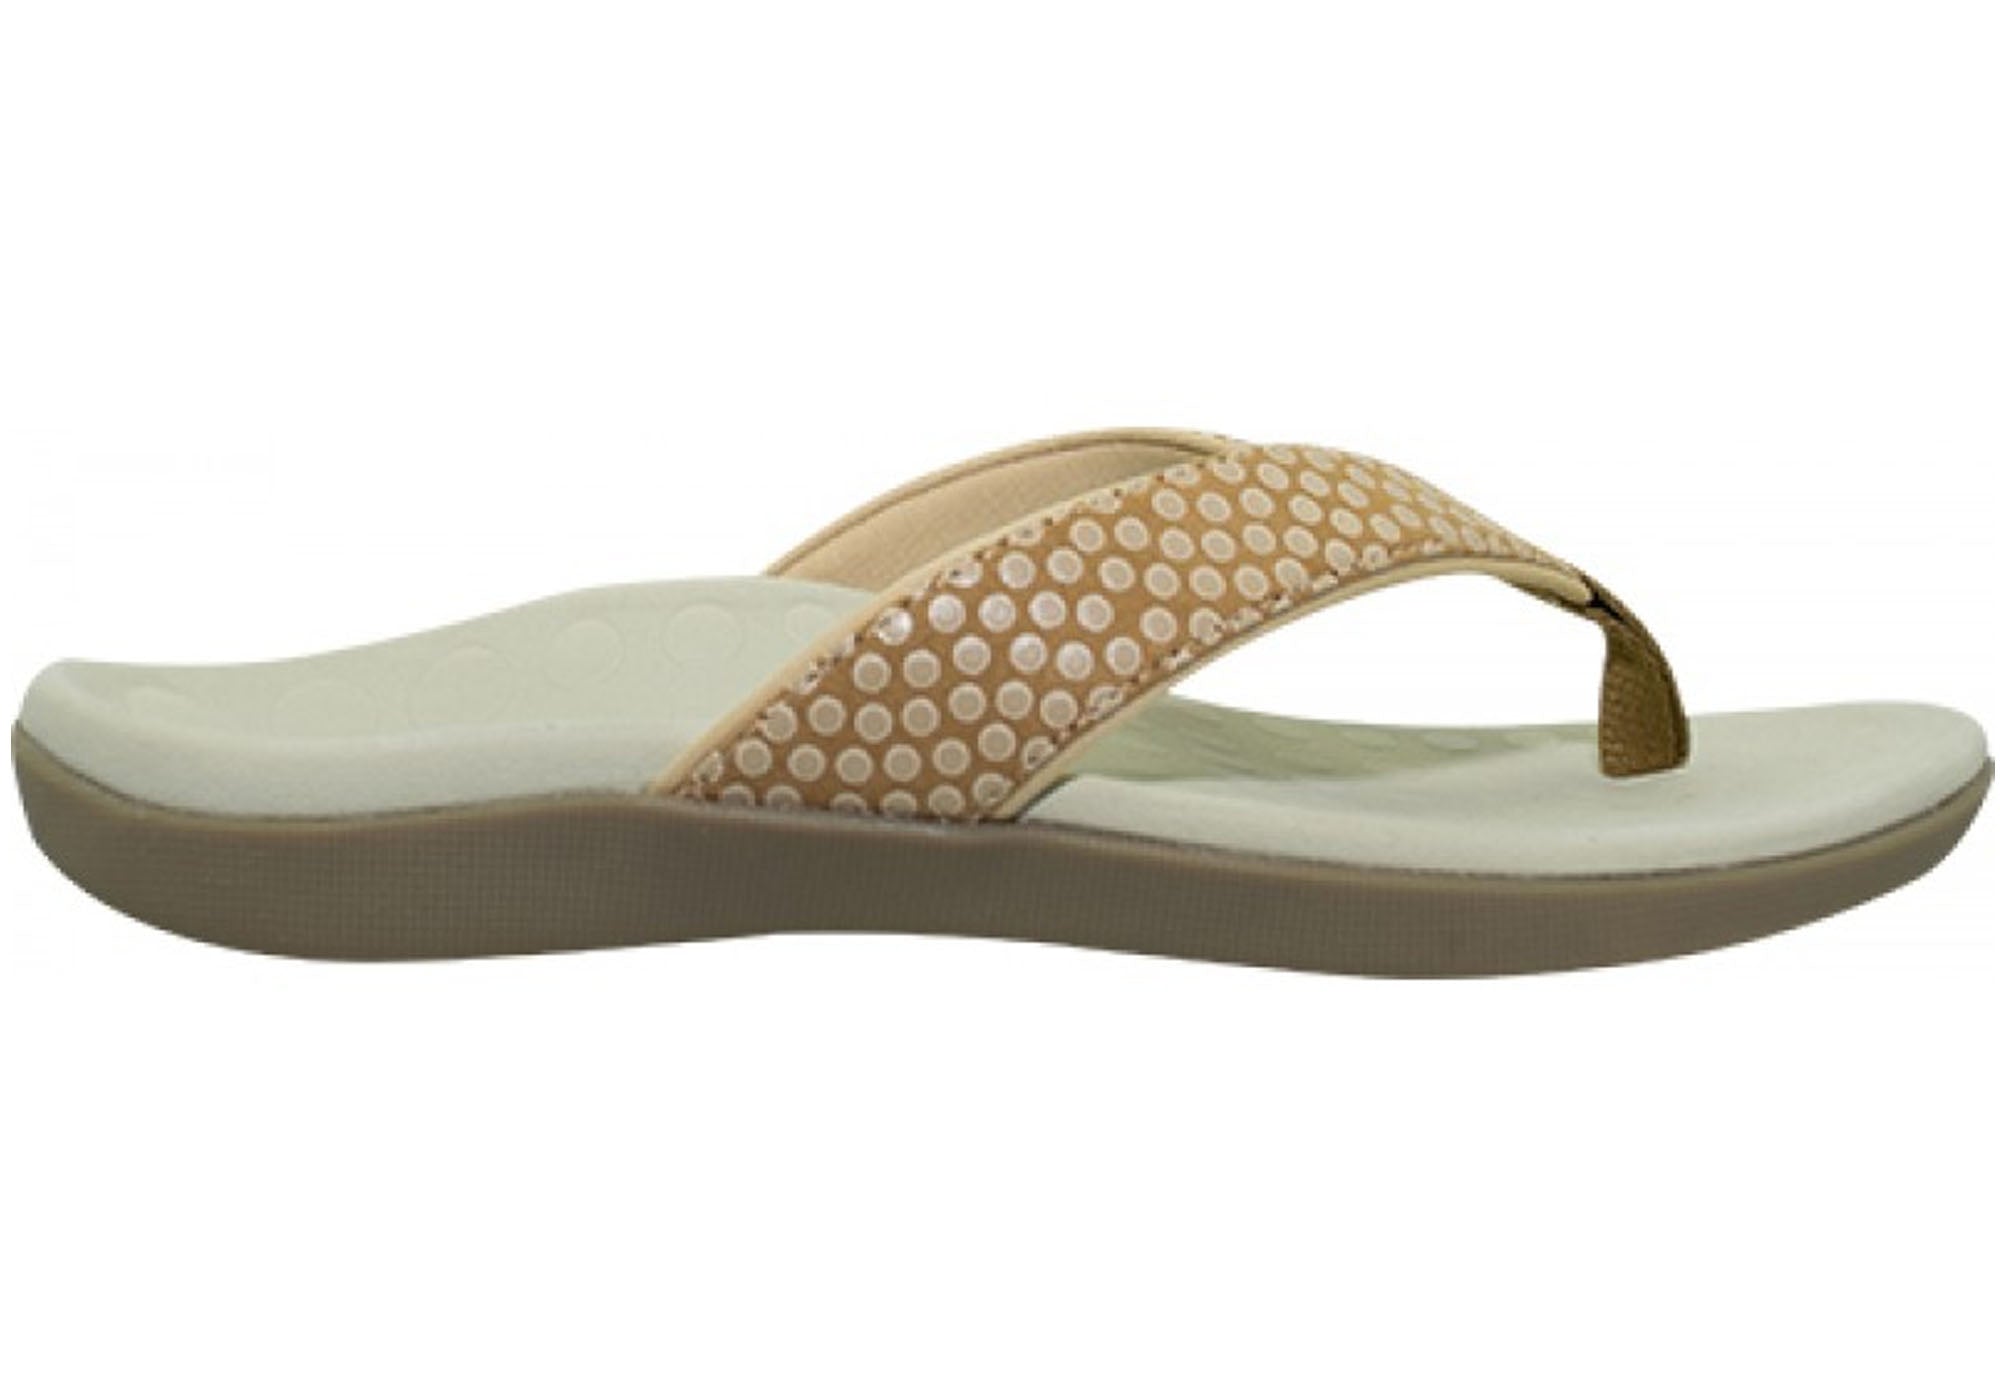 Scholl Orthaheel Sonoma II Womens Supportive Comfort Thongs Sandals ...